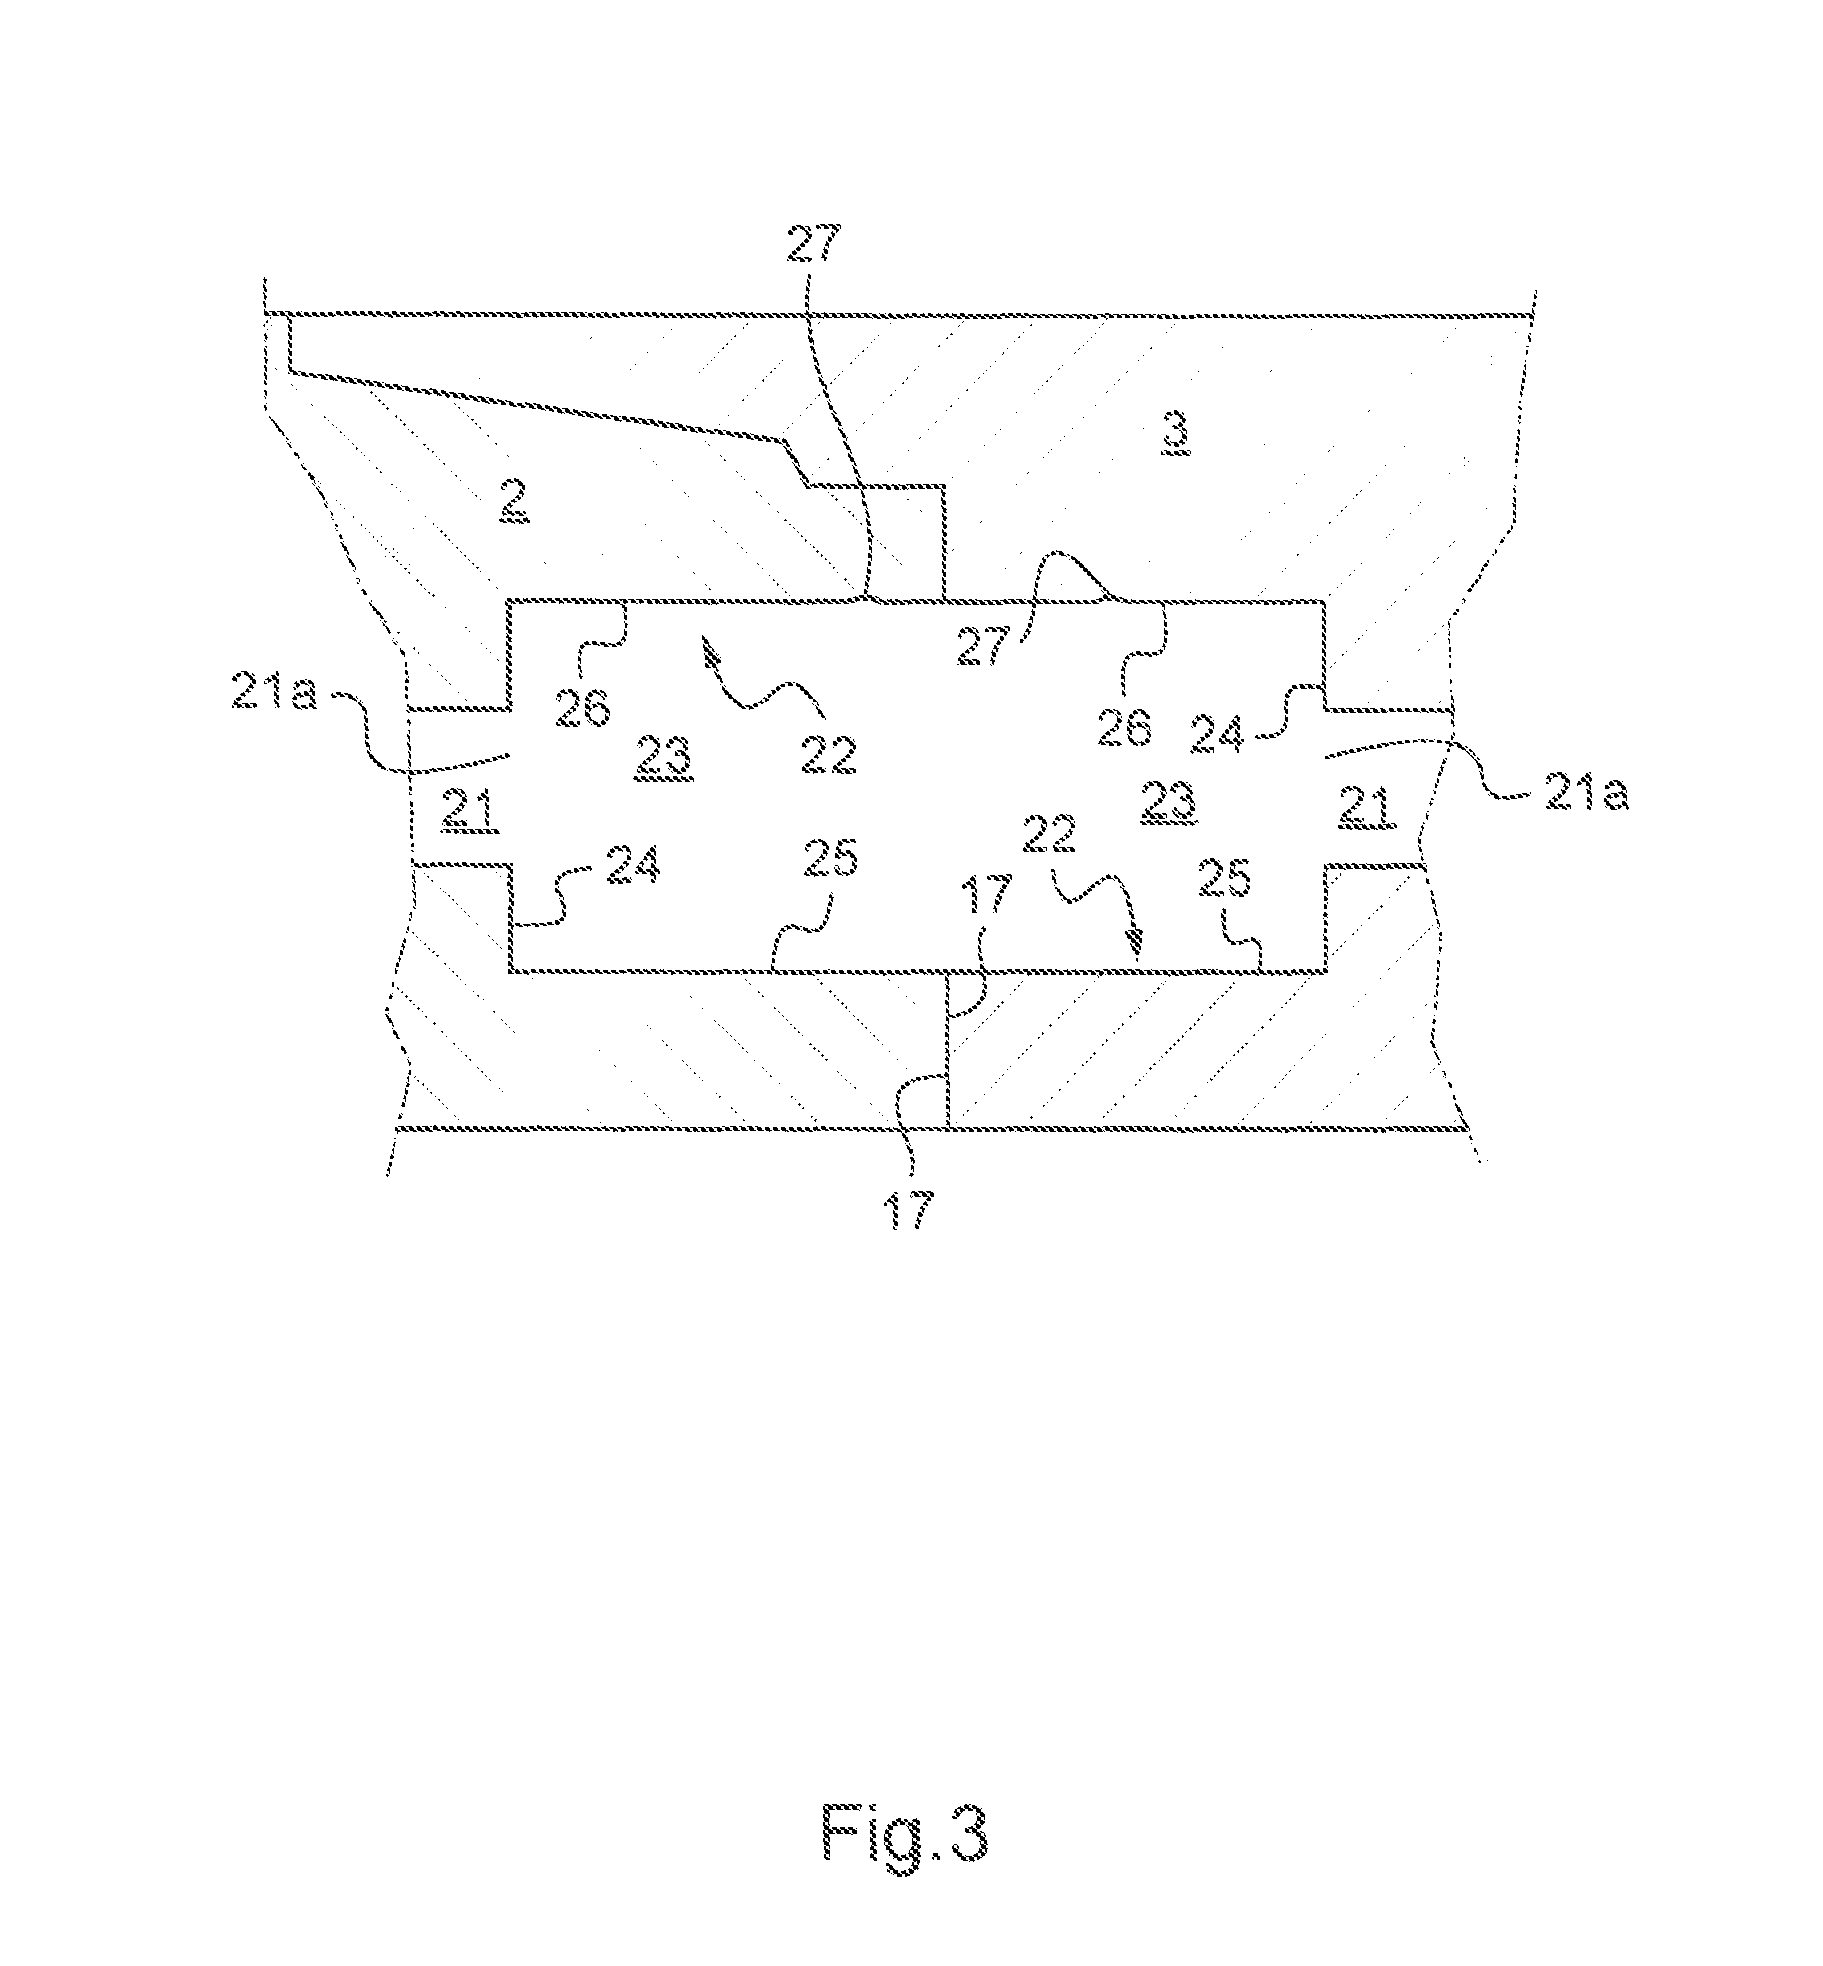 Drill stem component comprising a movable coupler and a pressure chamber